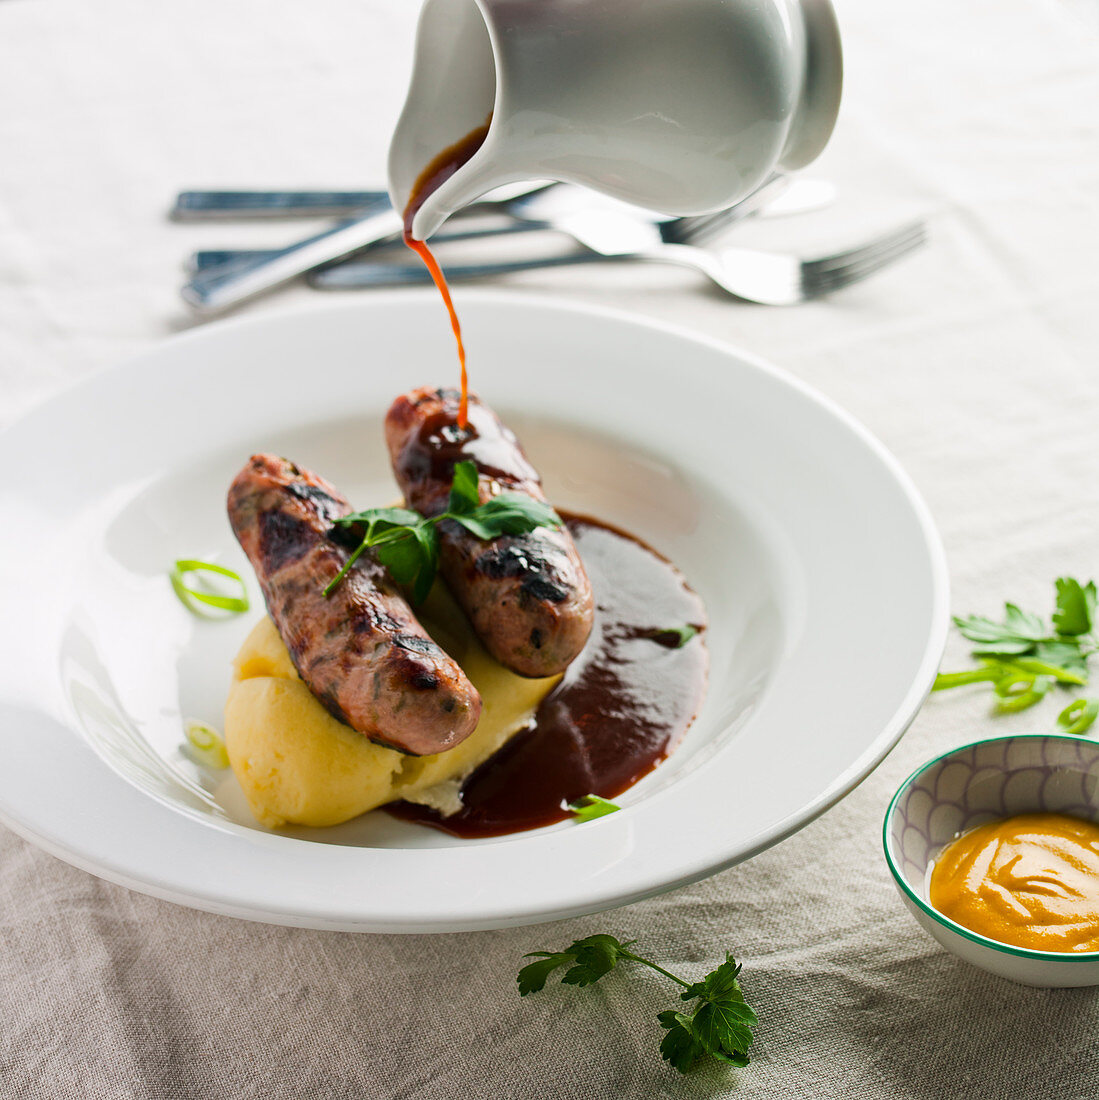 Bangers and mash with red wine gravy